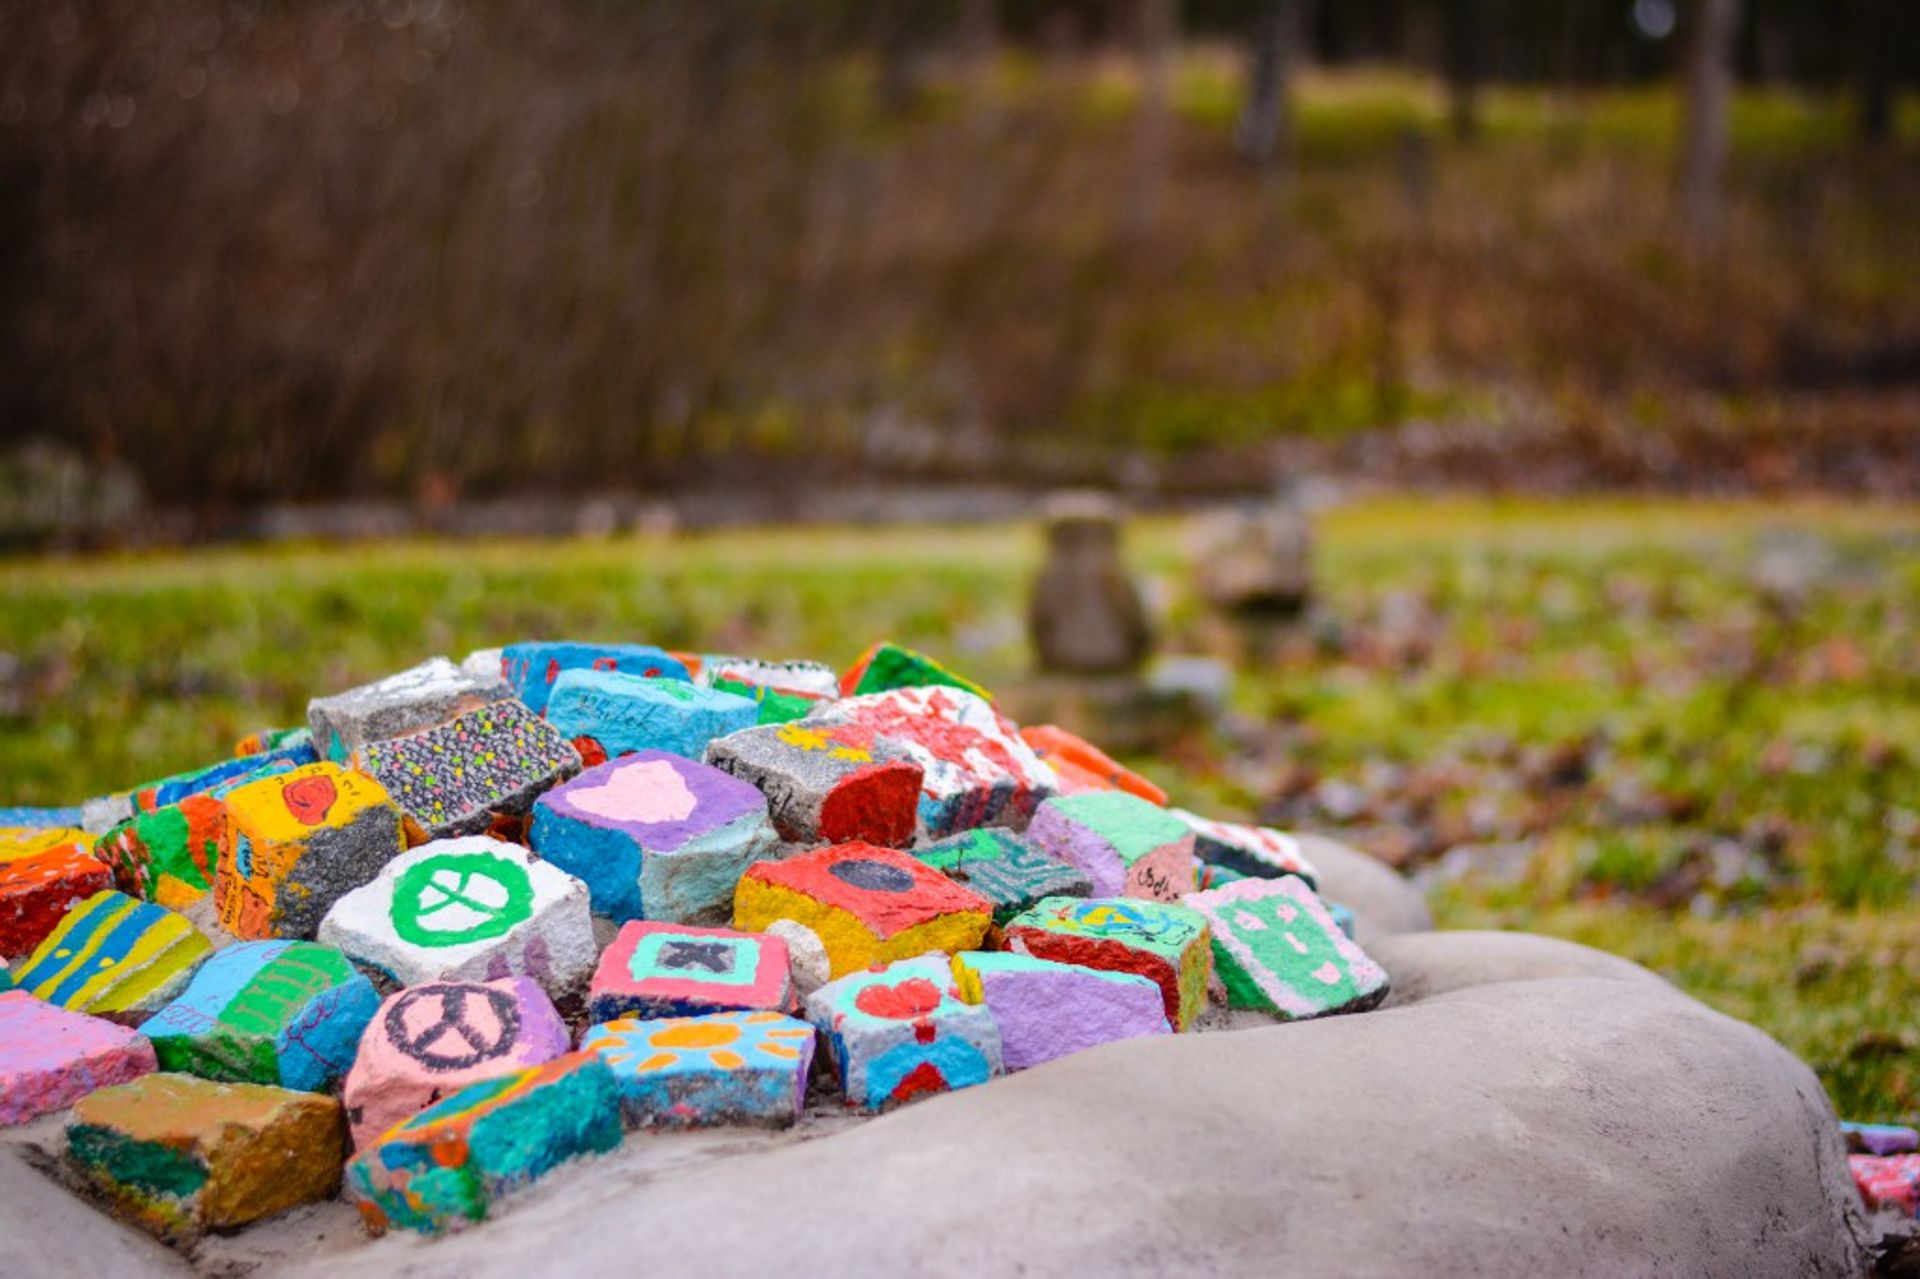 This palm shaped rock contains hand-painted peace signs. A prayer for peace, perhaps?